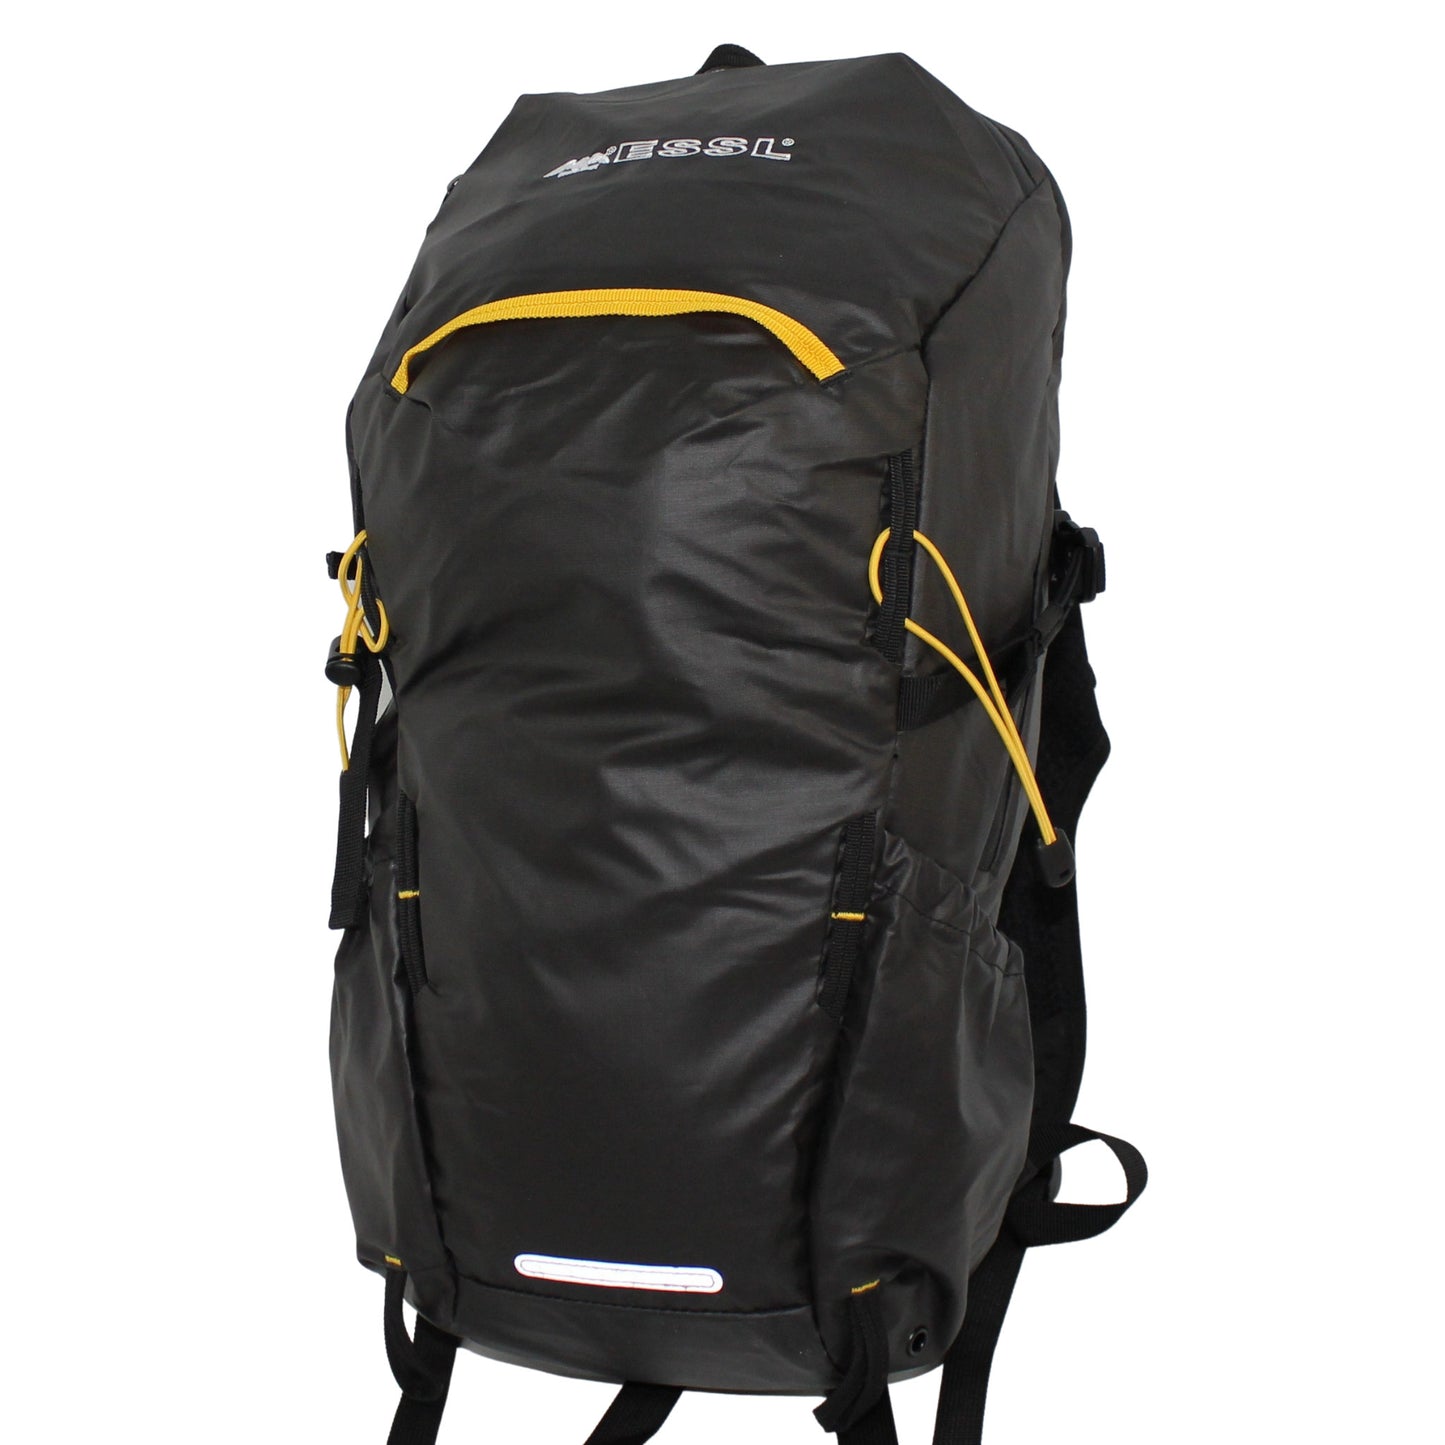 RU668 Extra light sports and hiking backpack